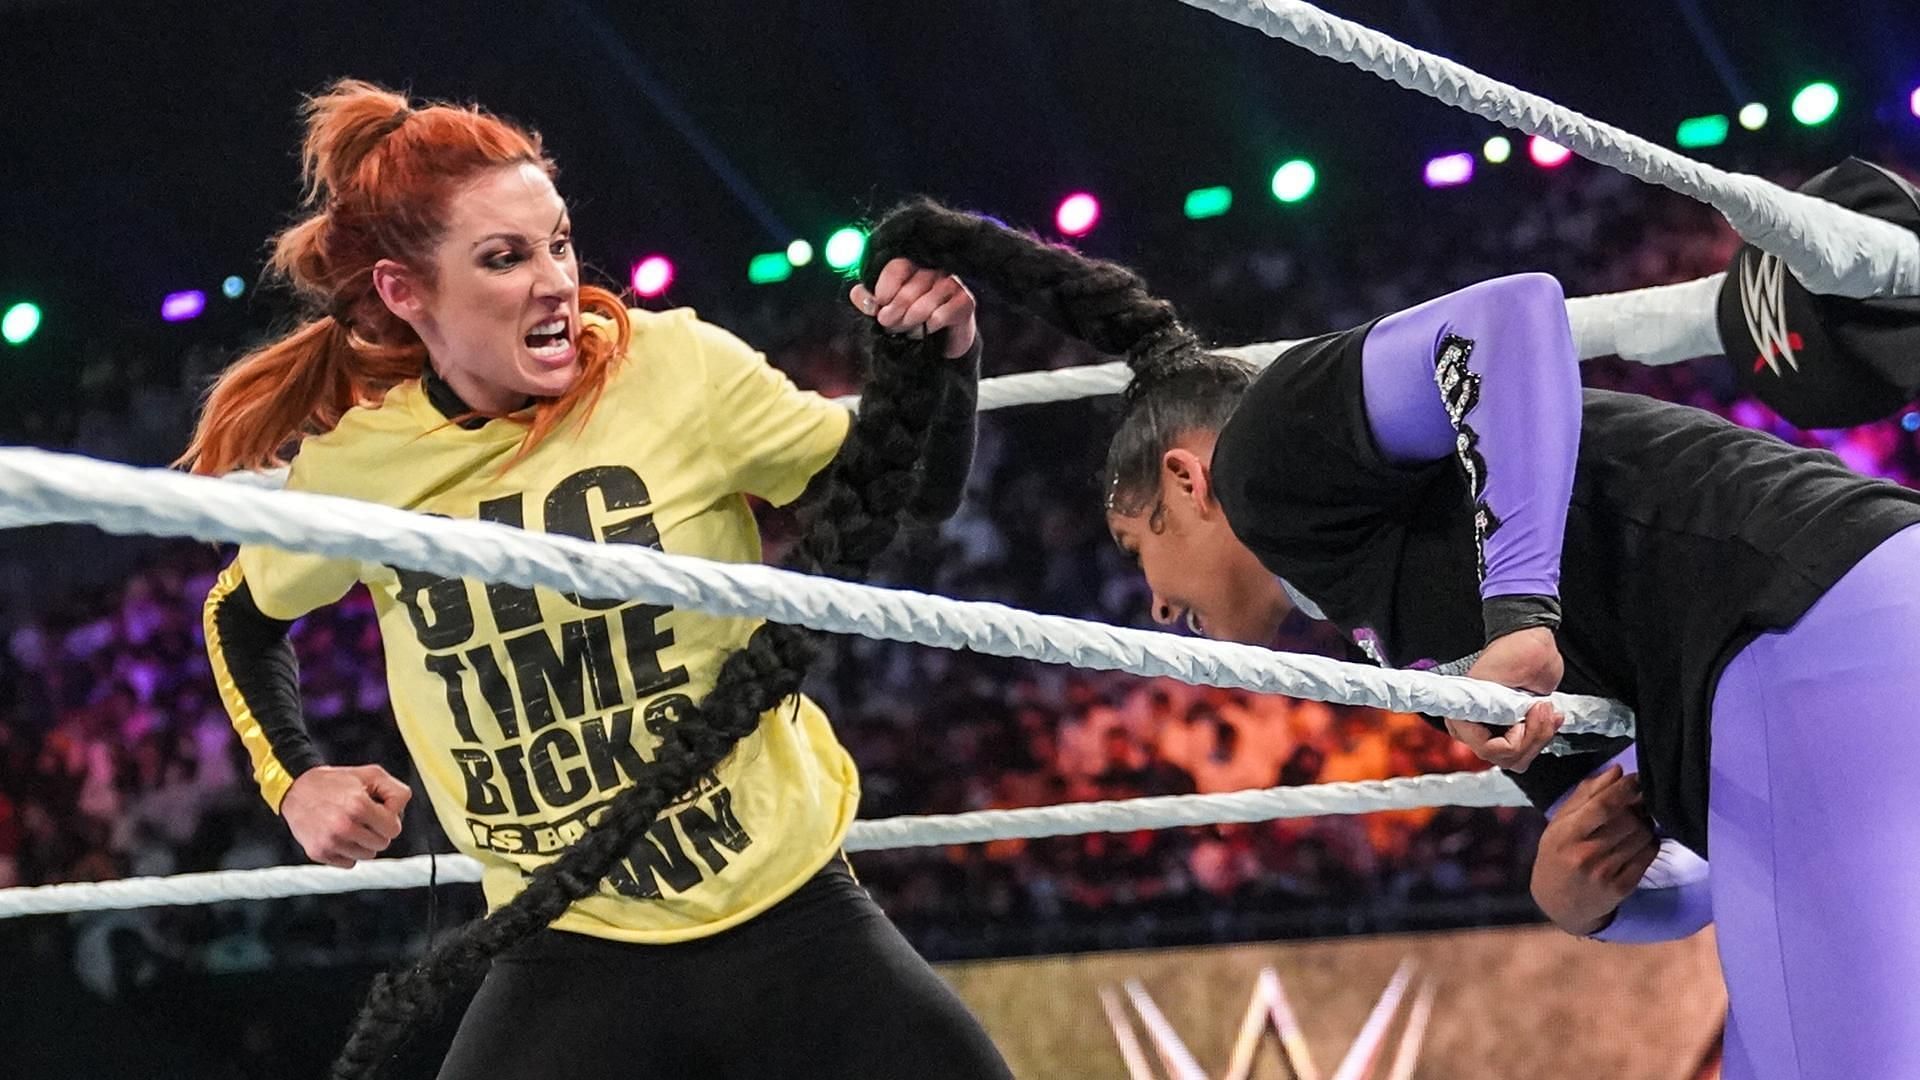 Becky Lynch attacking Bianca Belair at WWE Crown Jewel in 2021